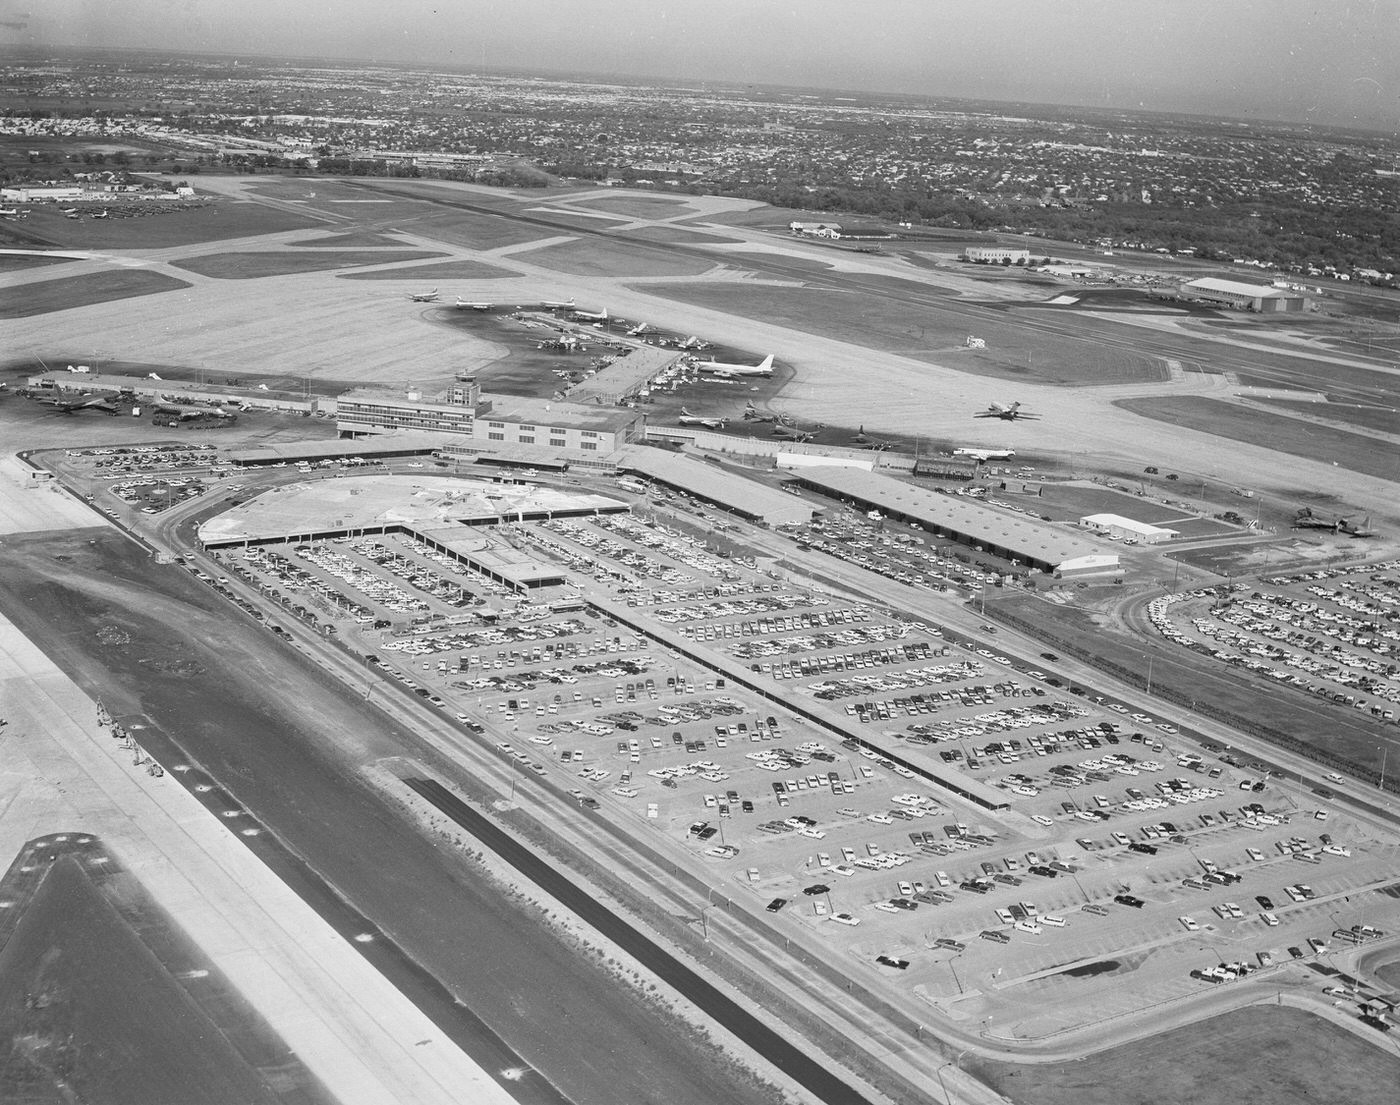 Parking area and runway at Love Field, Dallas, 1960